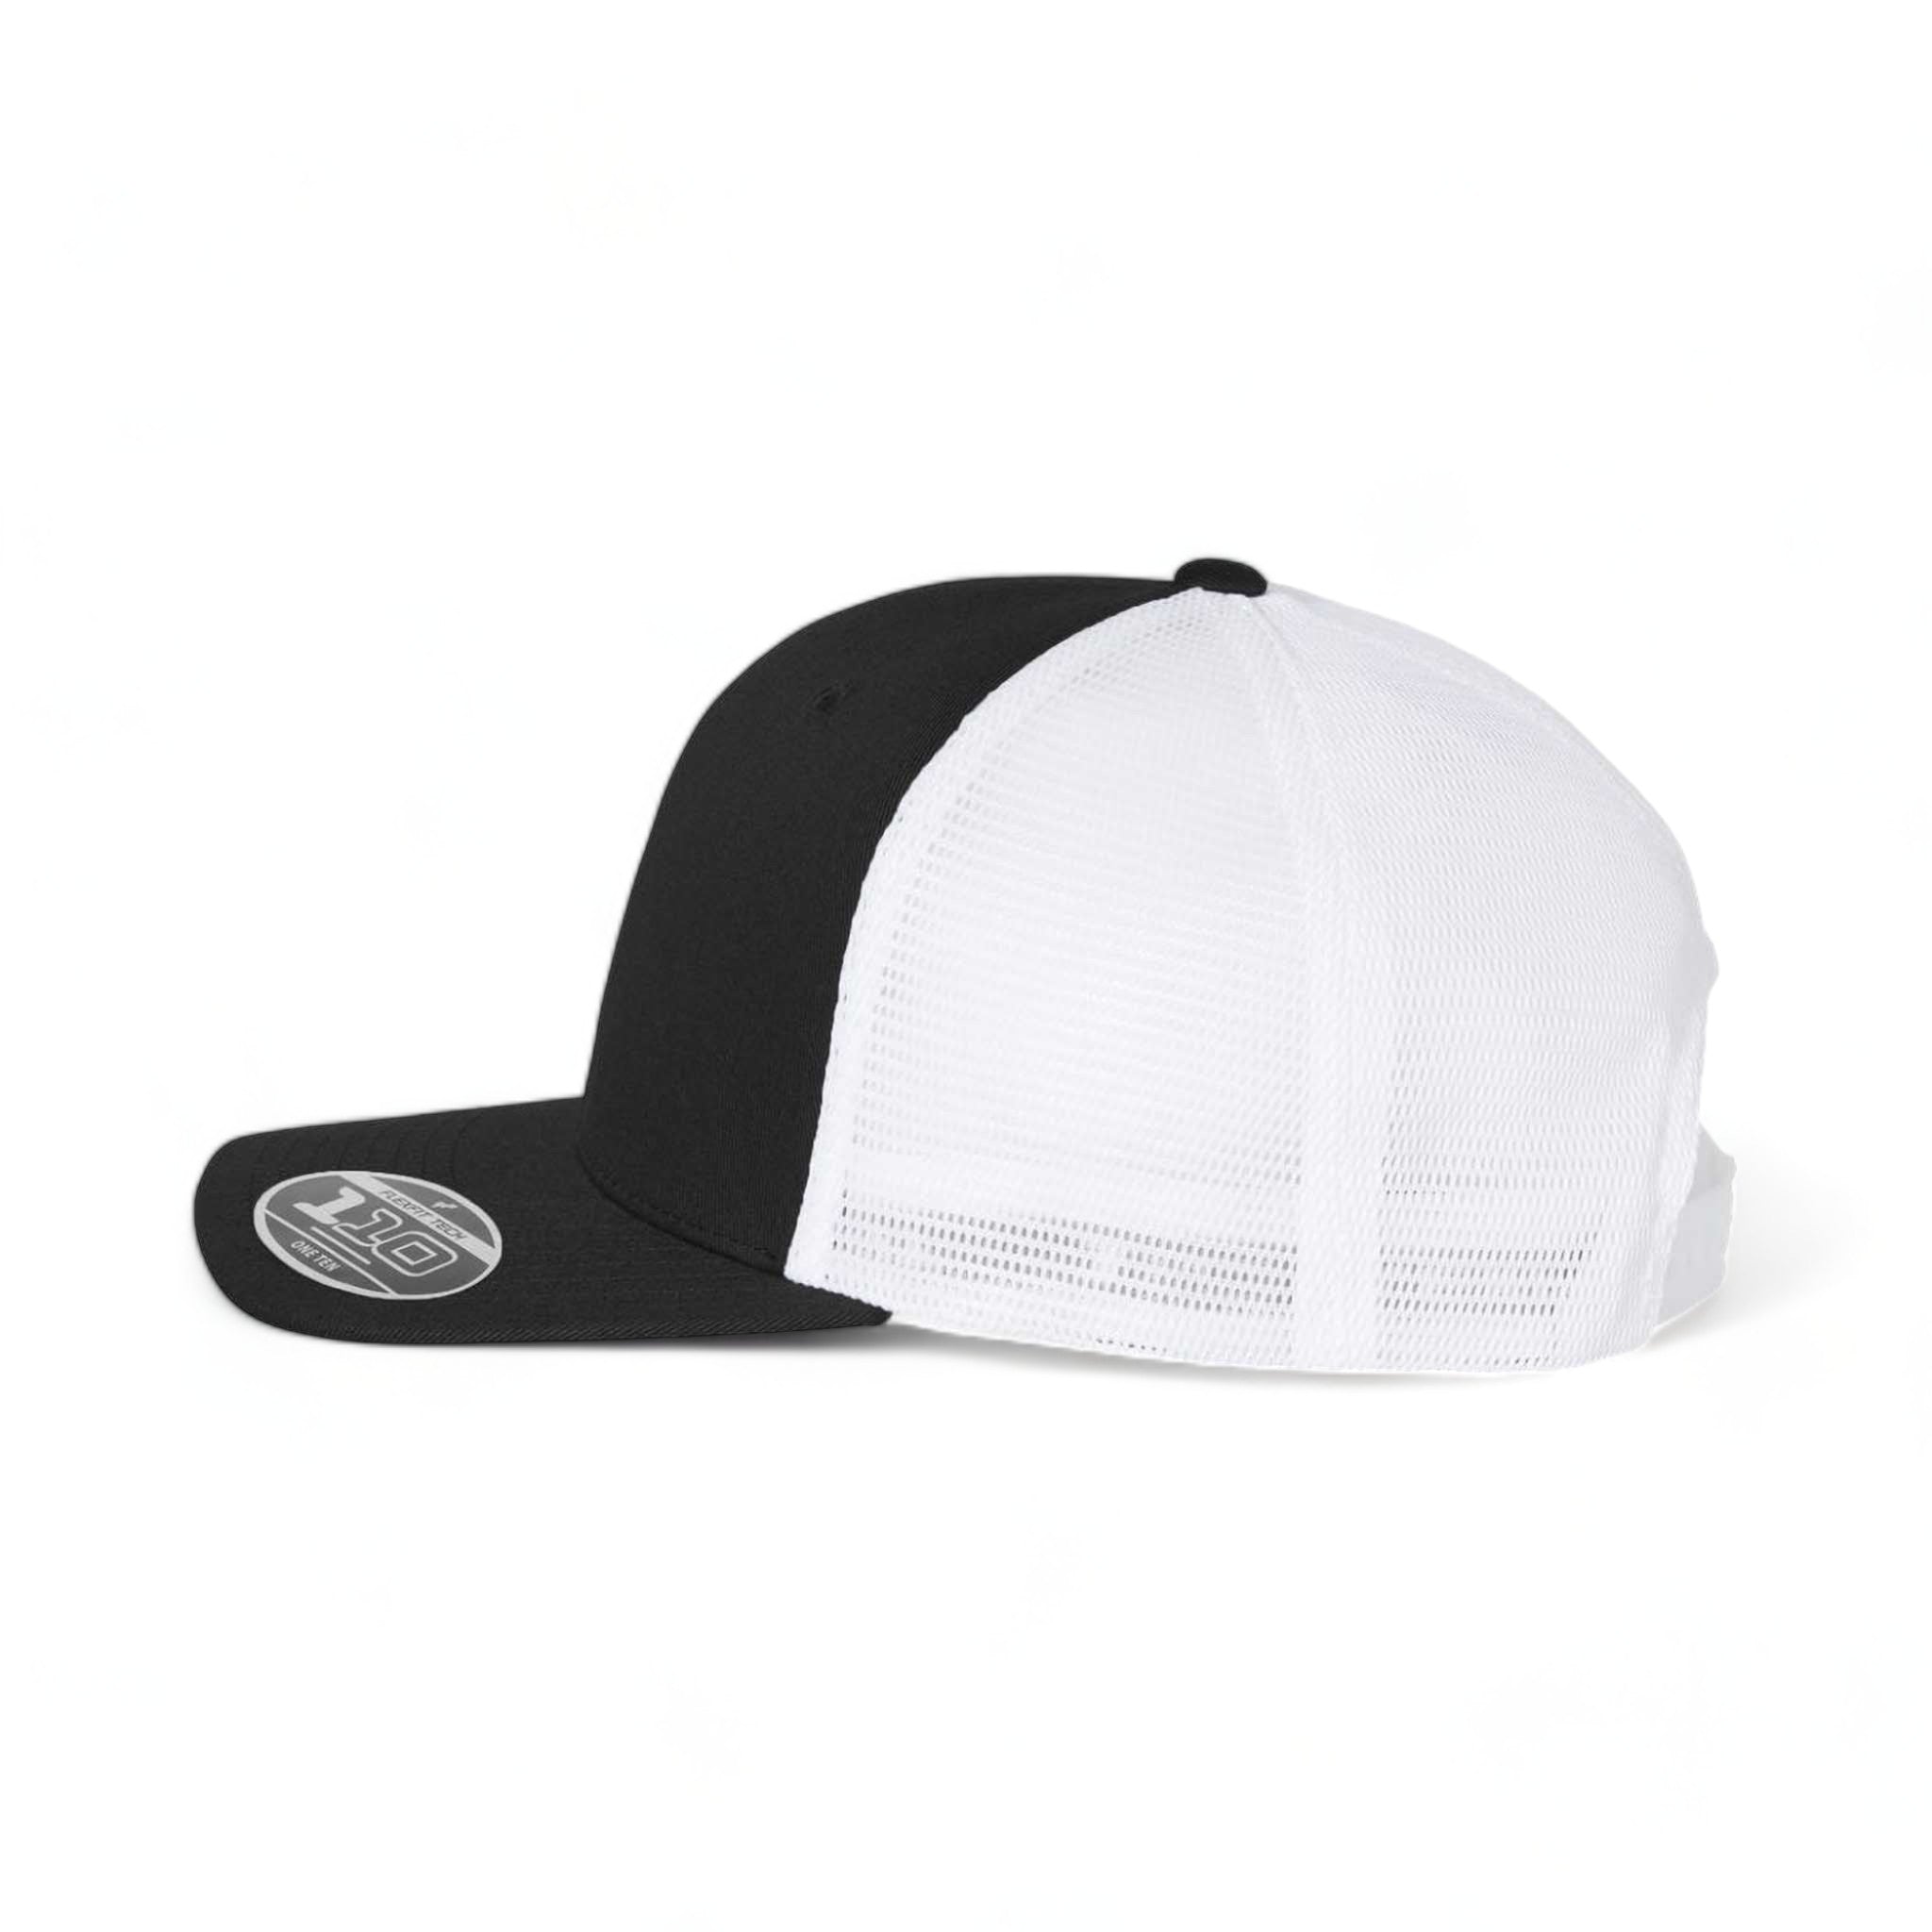 Side view of Flexfit 110M custom hat in black and white